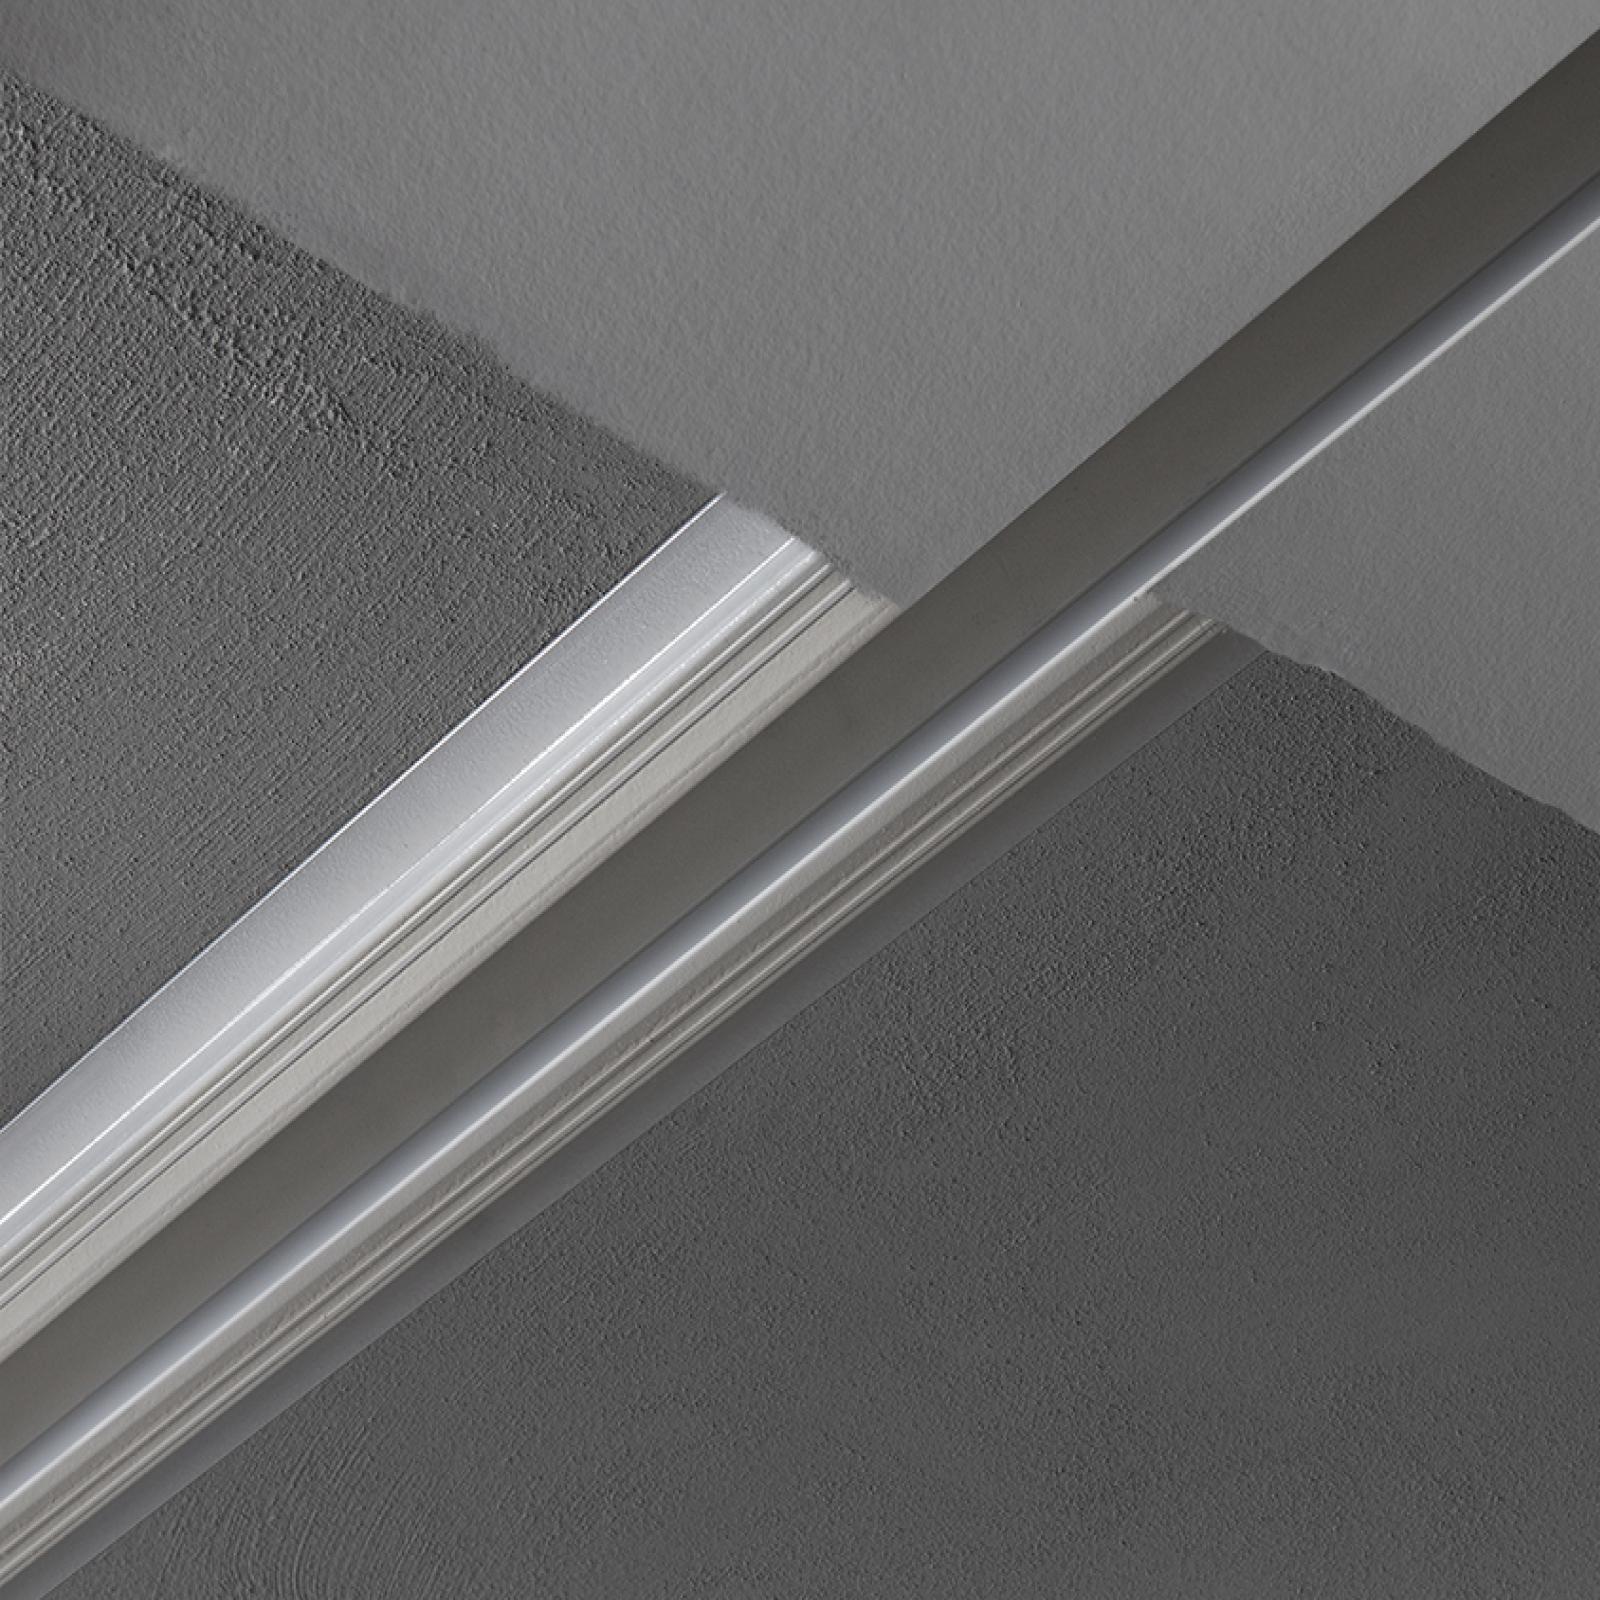 Gallery Product Fyo Linear Light Linealightgroup 3 (1)